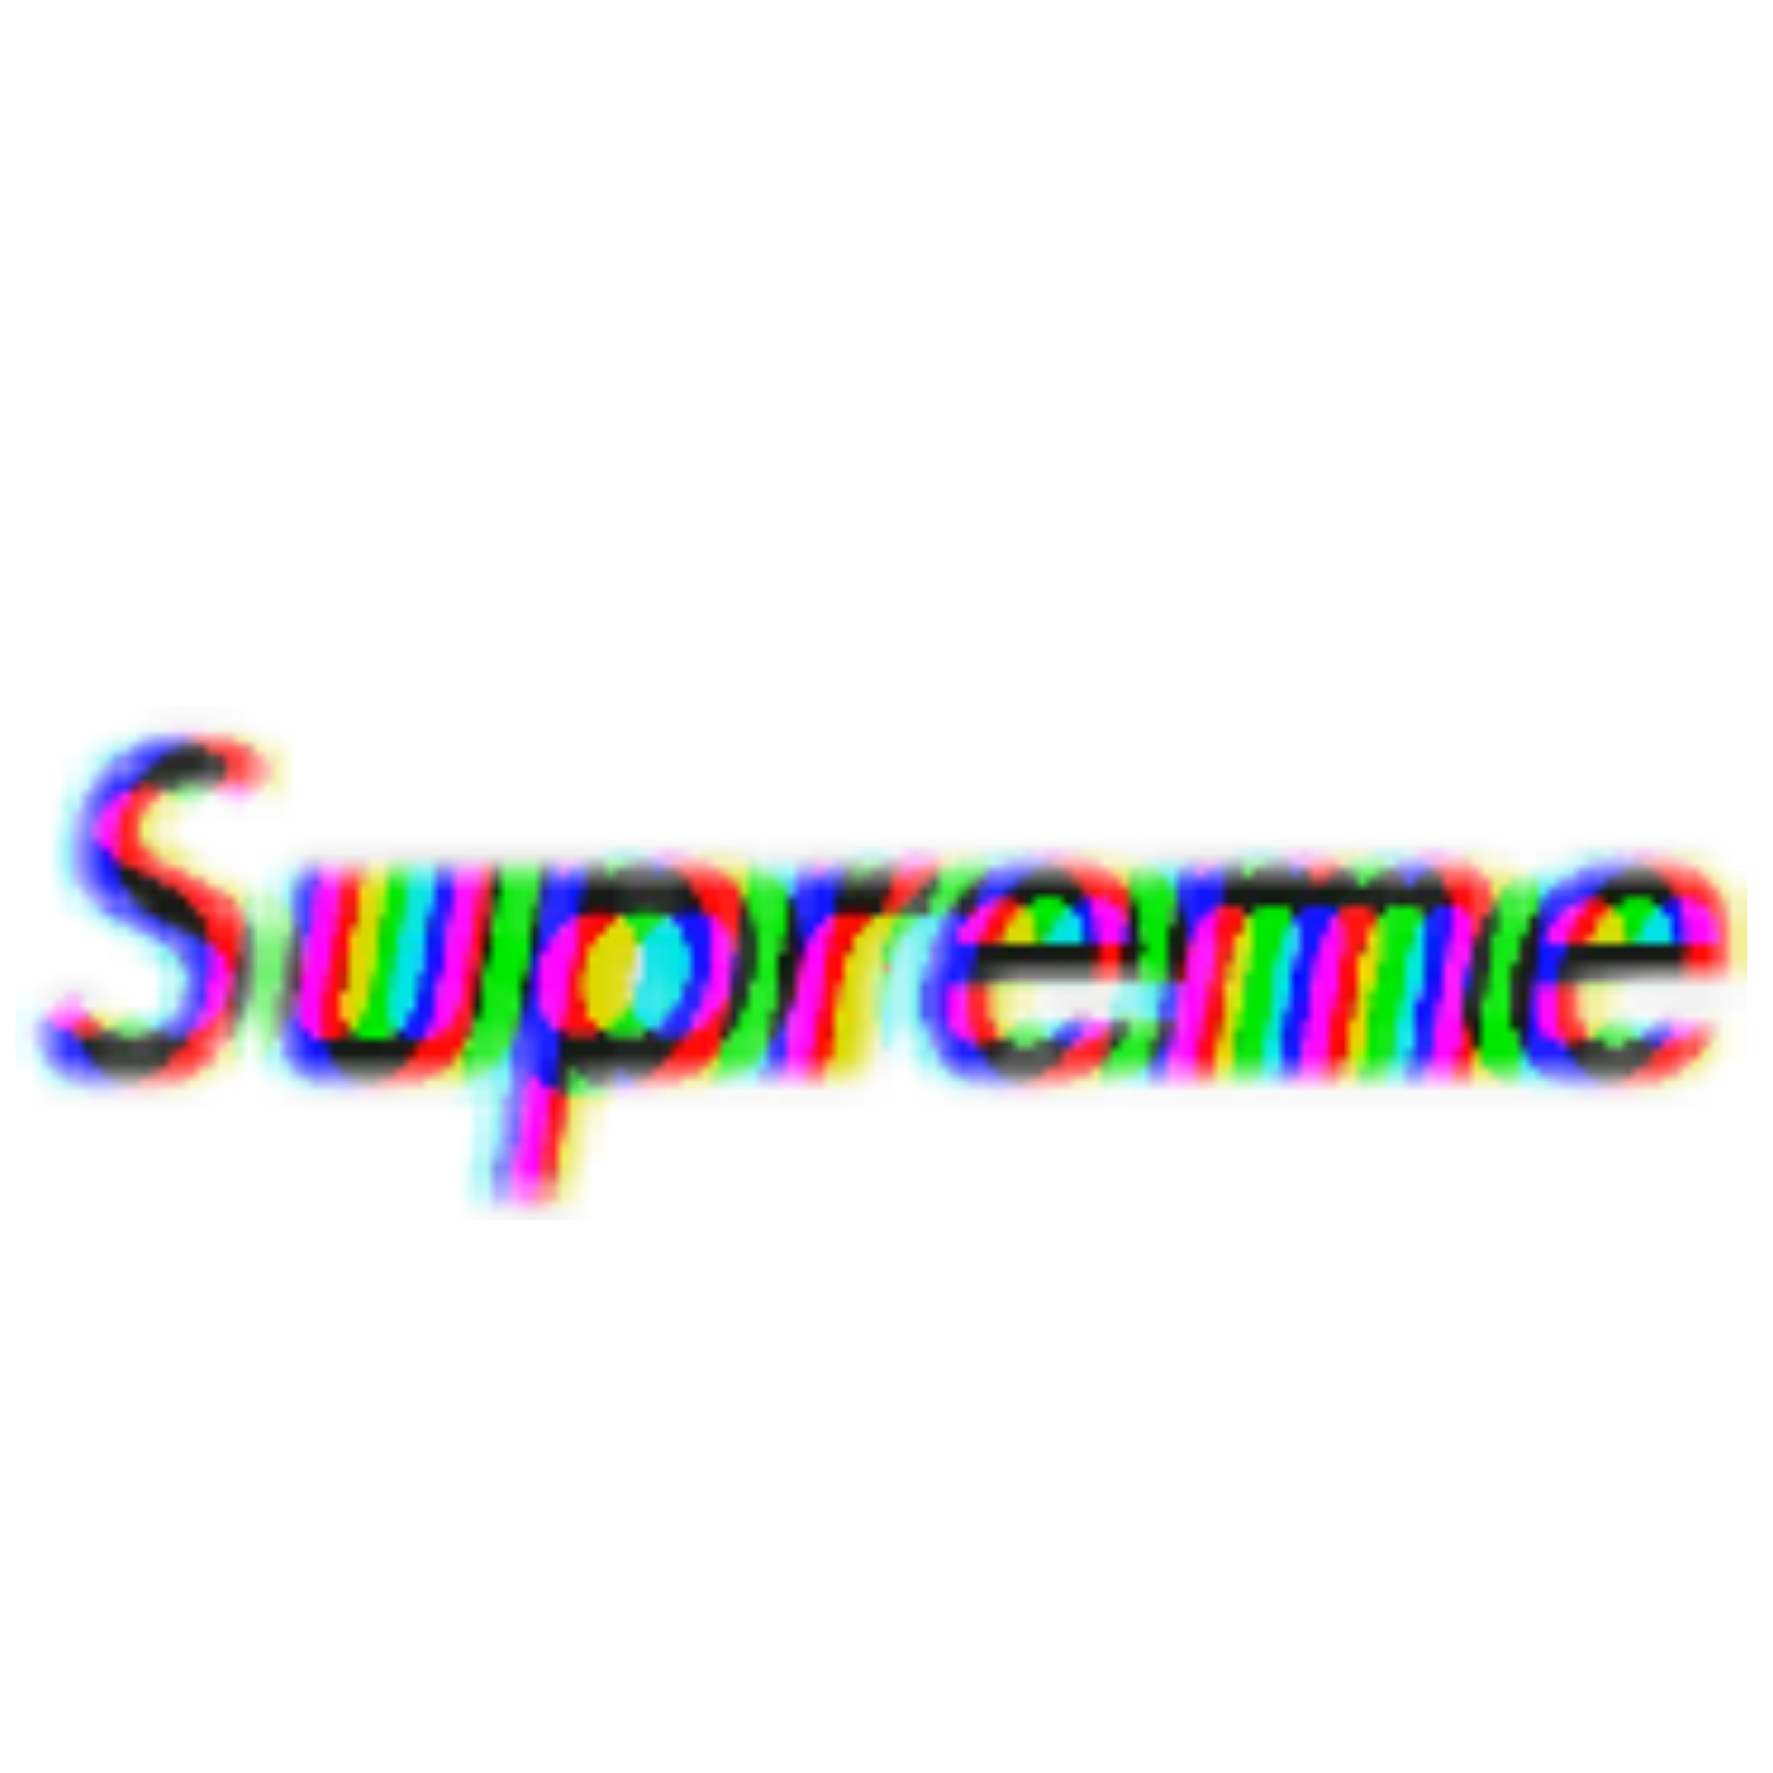 Supreme Glitch Effect Tumblr Aesthetic Sticker Png Blac   